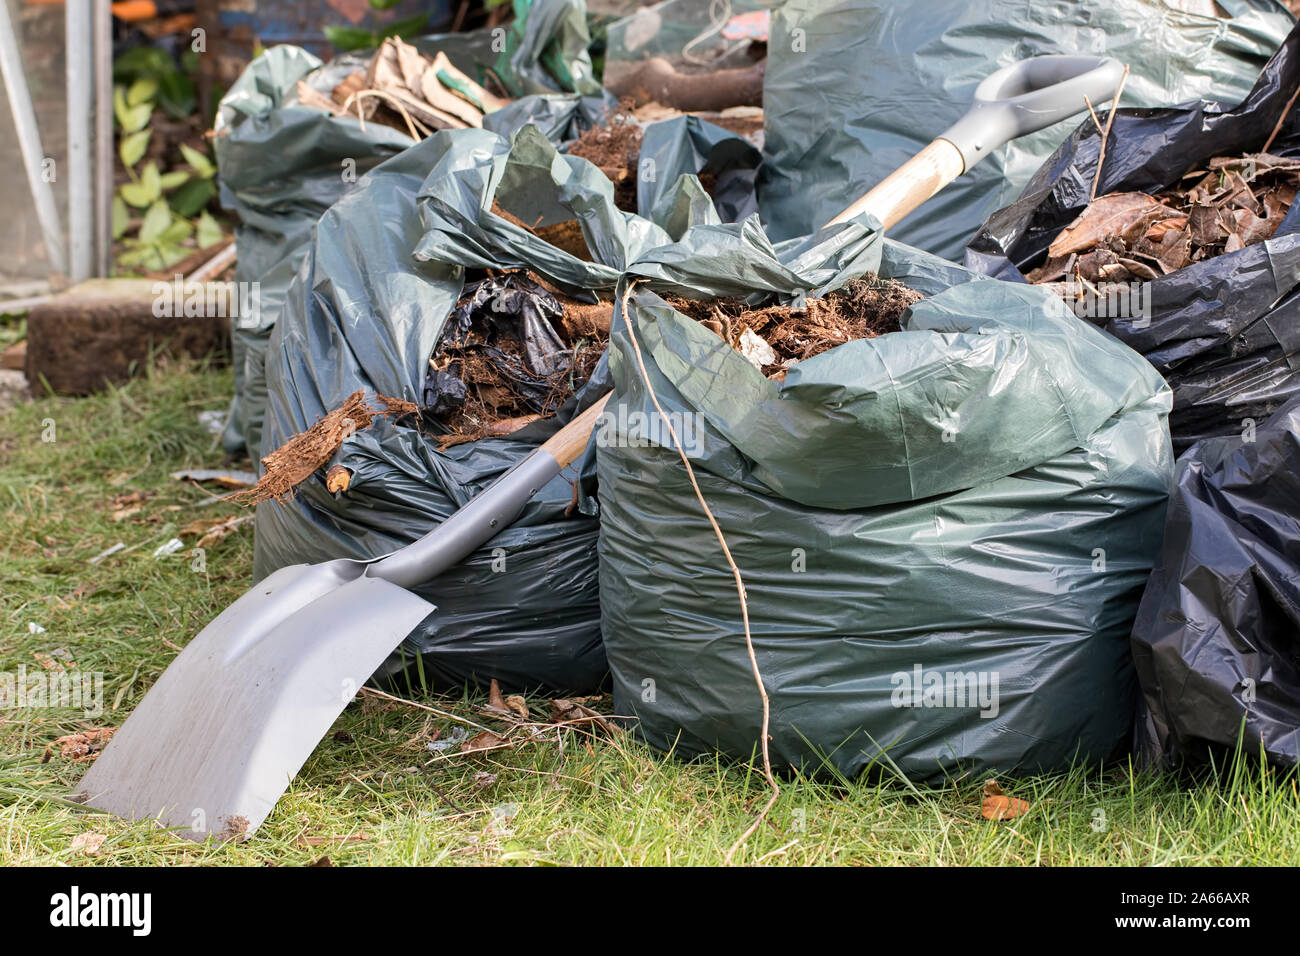 Garden waste. Brown leaves and rubbish collected from a gardening tidy up. Spade over sacks of garden refuse on a lawn. Stock Photo